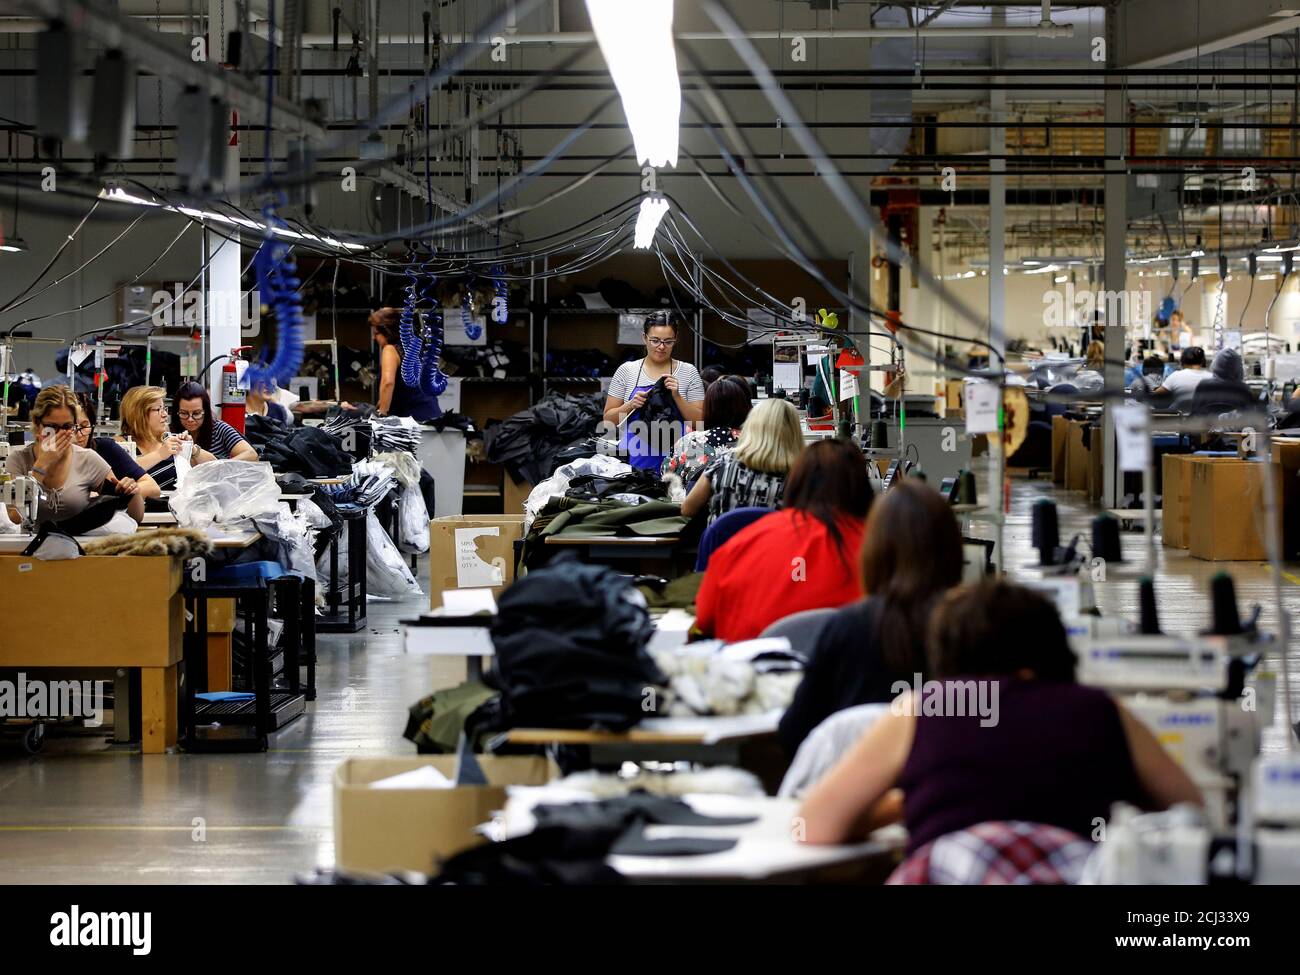 Workers make jackets at the Canada Goose factory in Toronto, Ontario, Canada,  February 23, 2018. REUTERS/Mark Blinch Stock Photo - Alamy